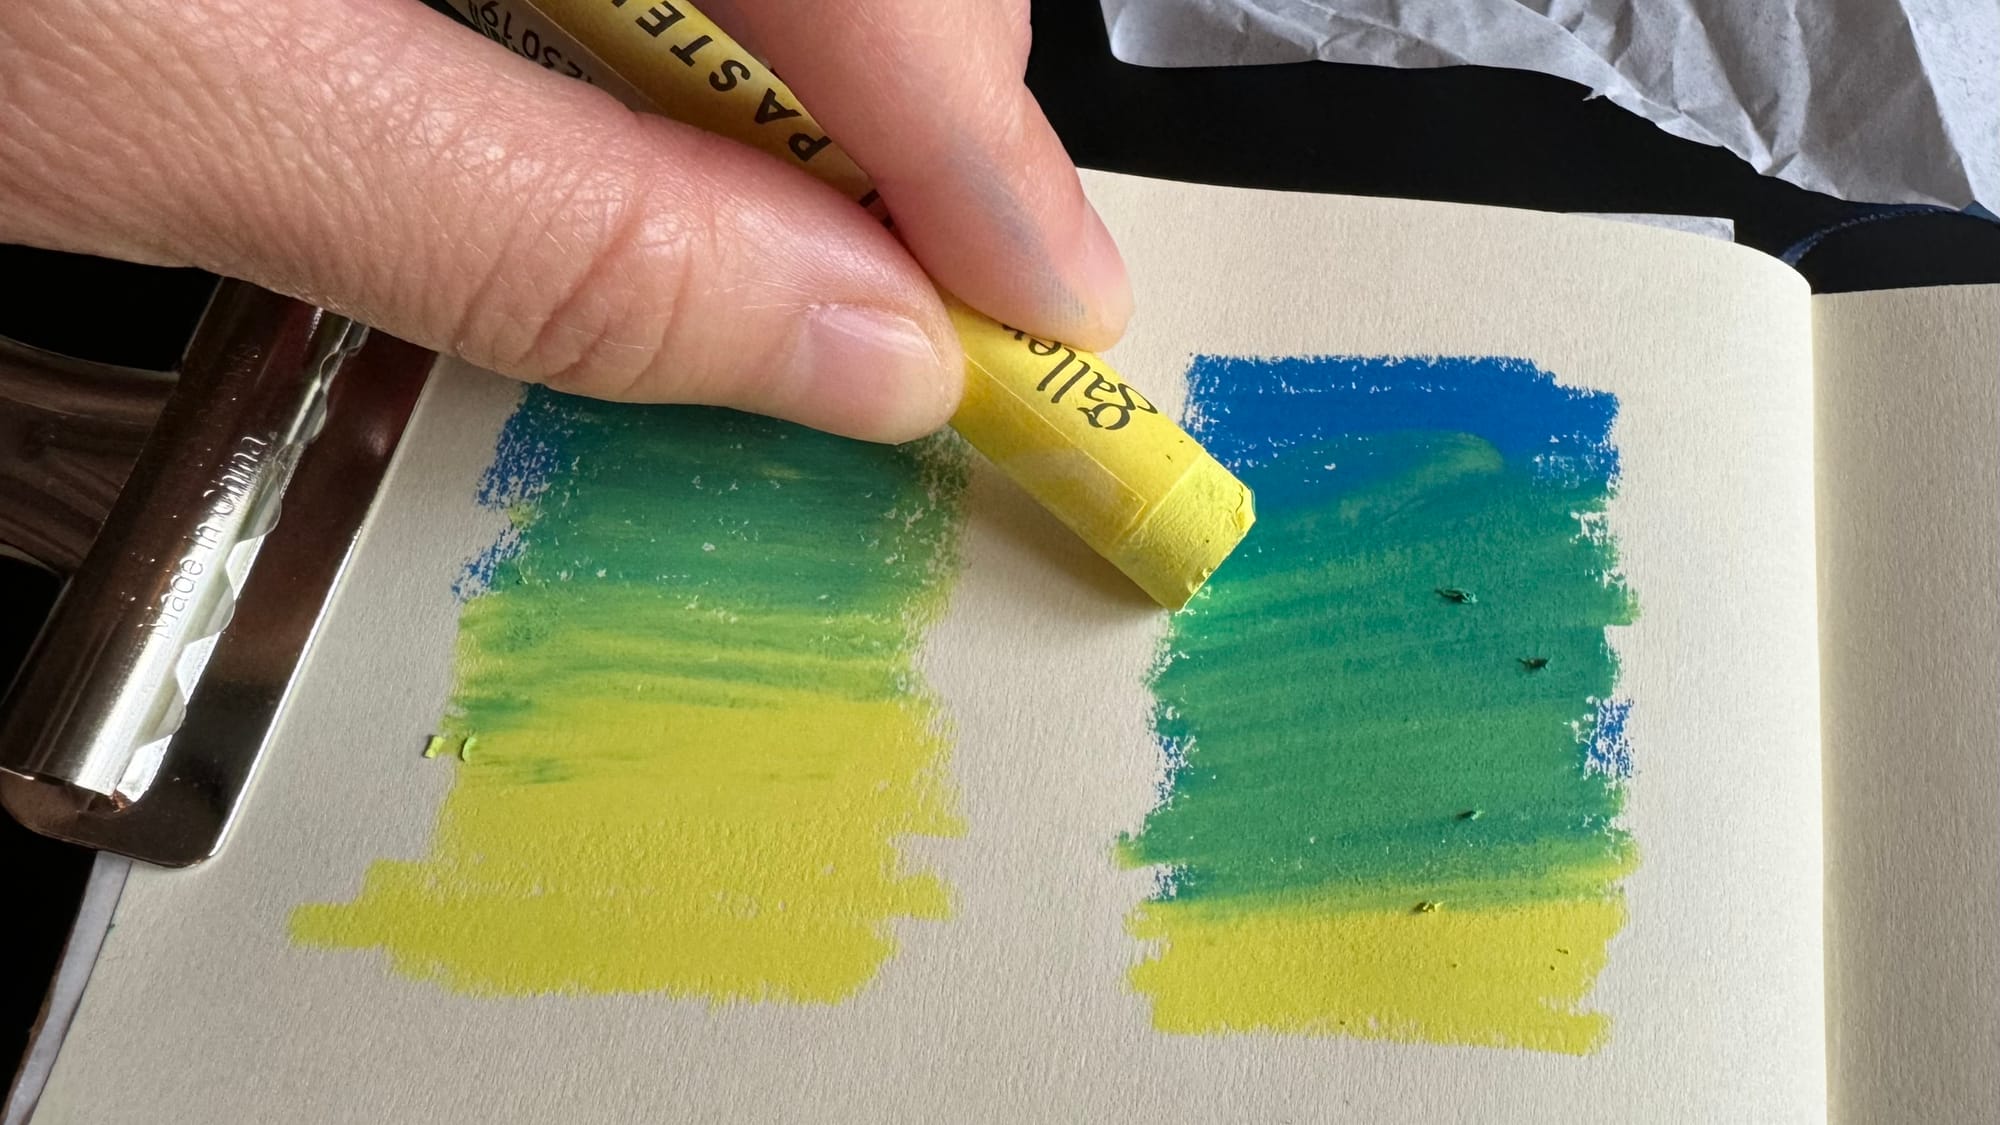 Something new - oil pastels, pt 2: Techniques